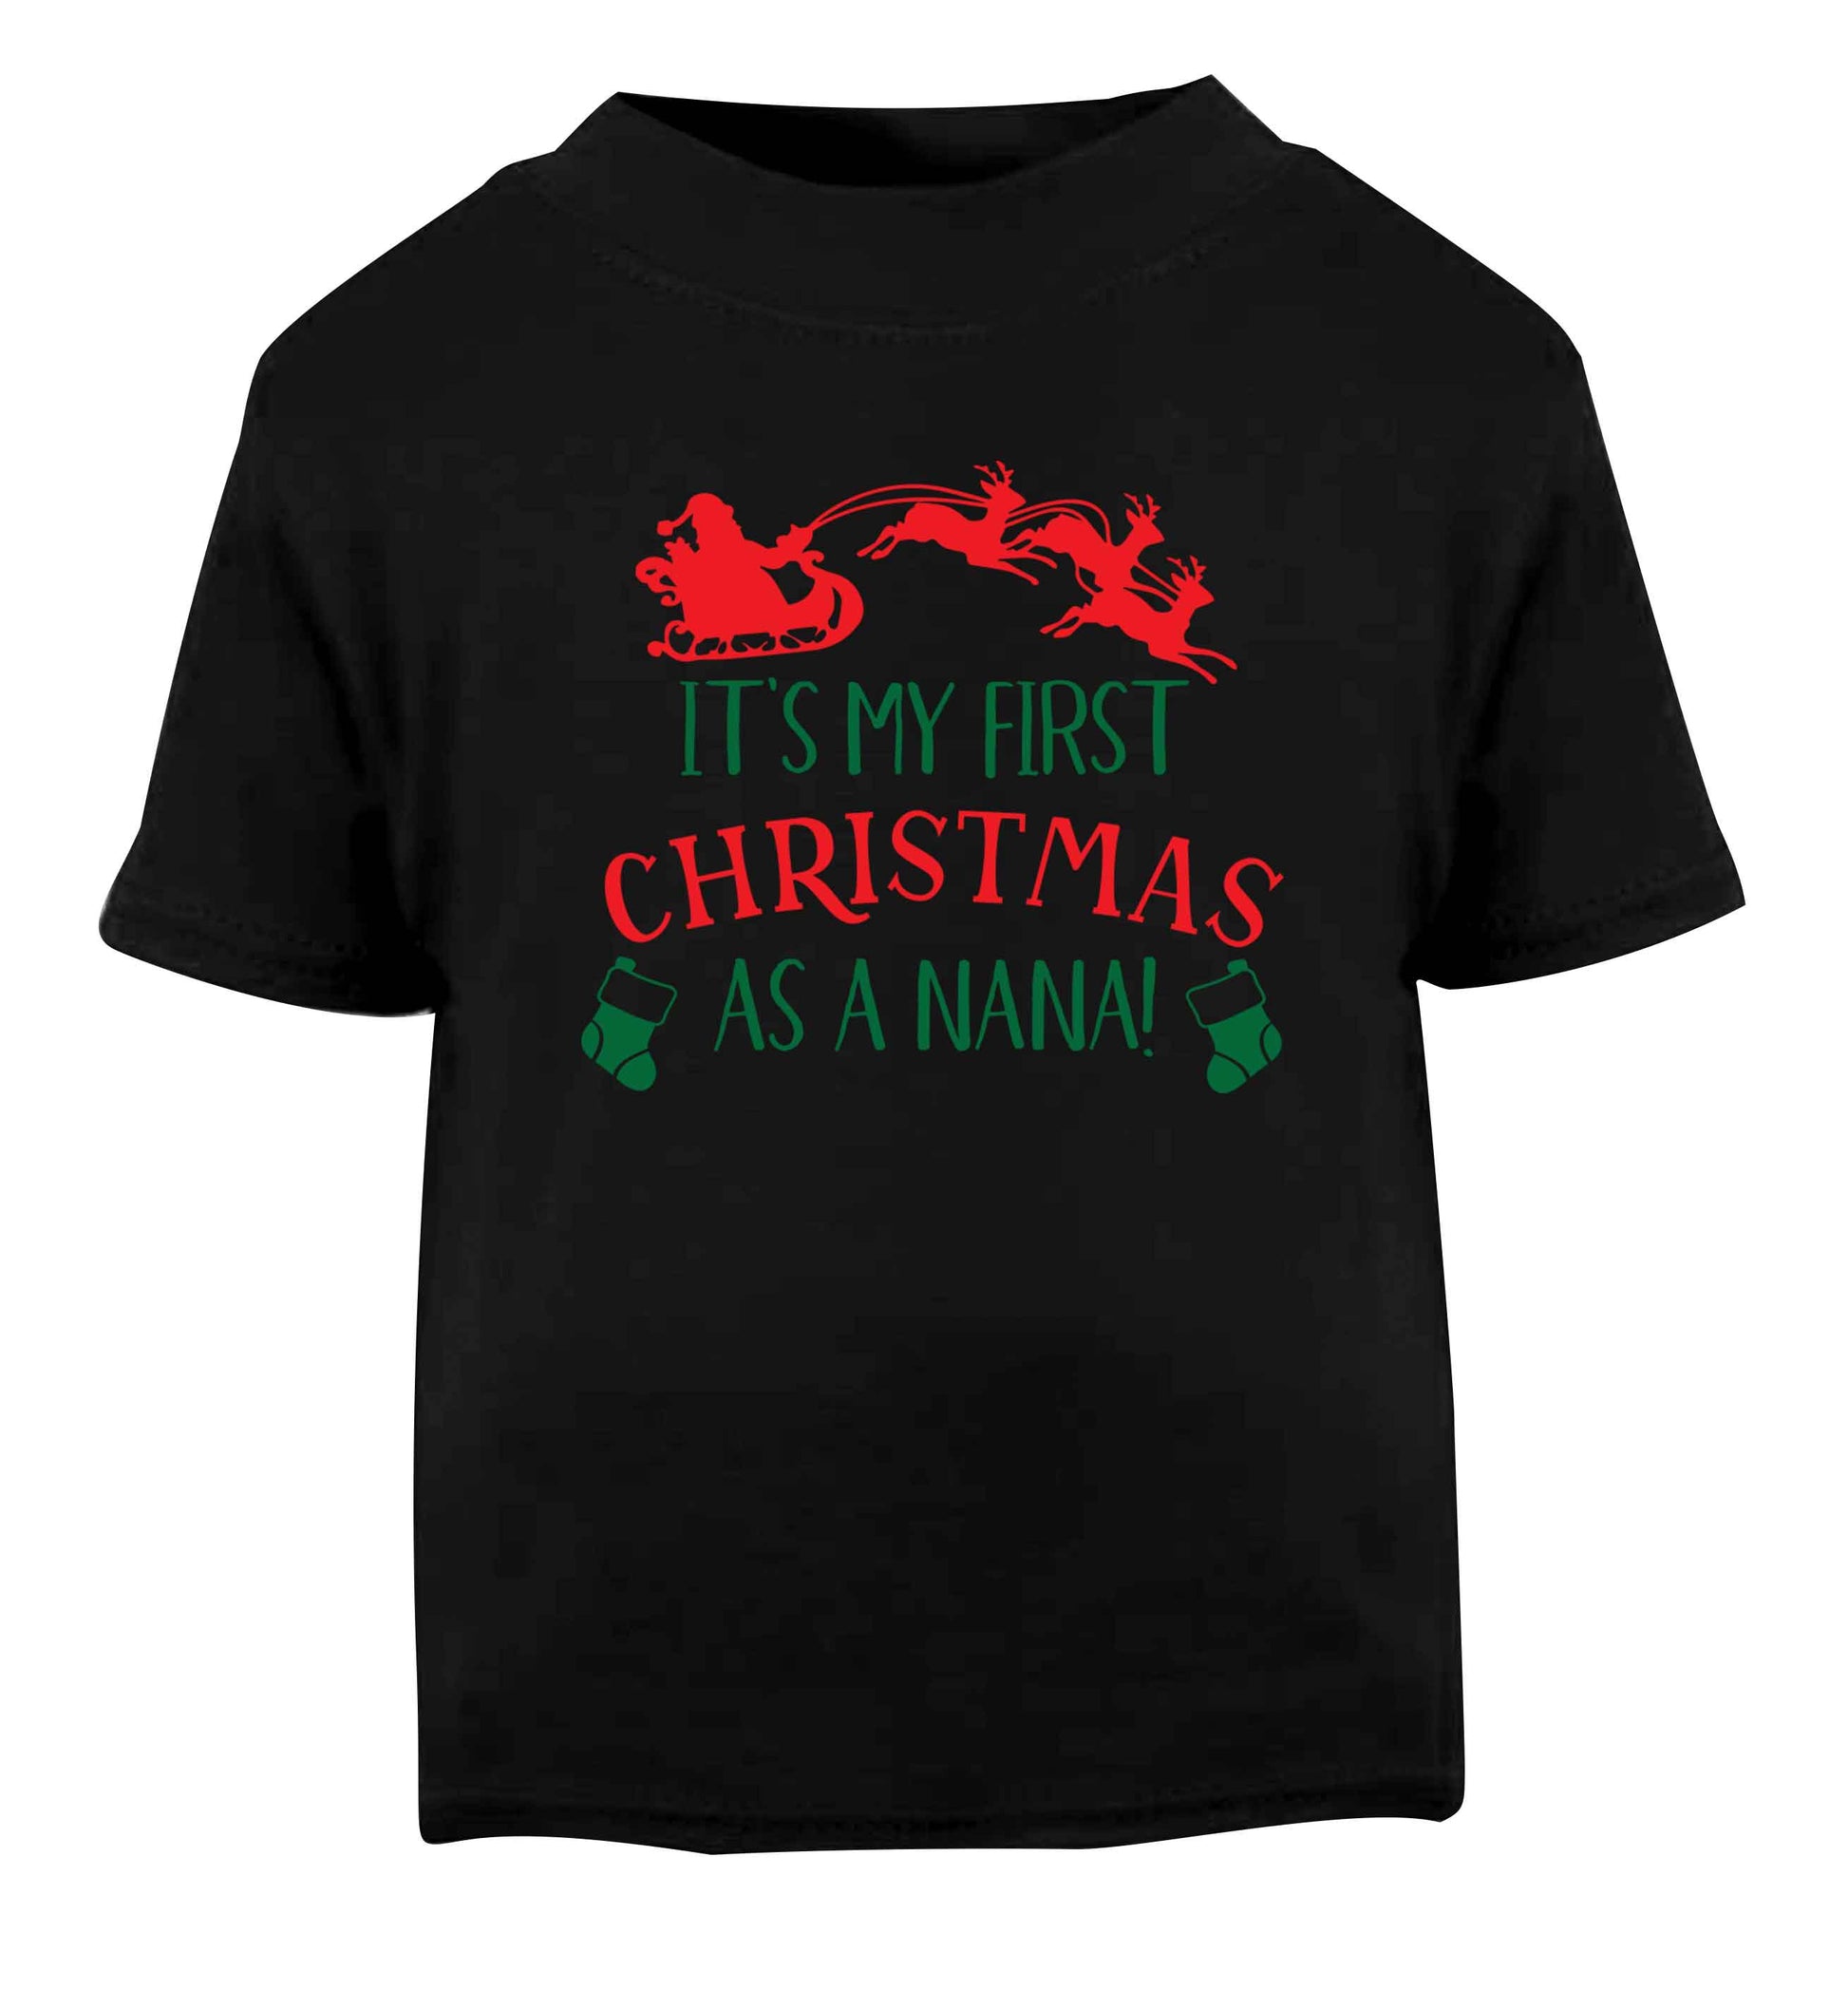 It's my first Christmas as a nana Black Baby Toddler Tshirt 2 years